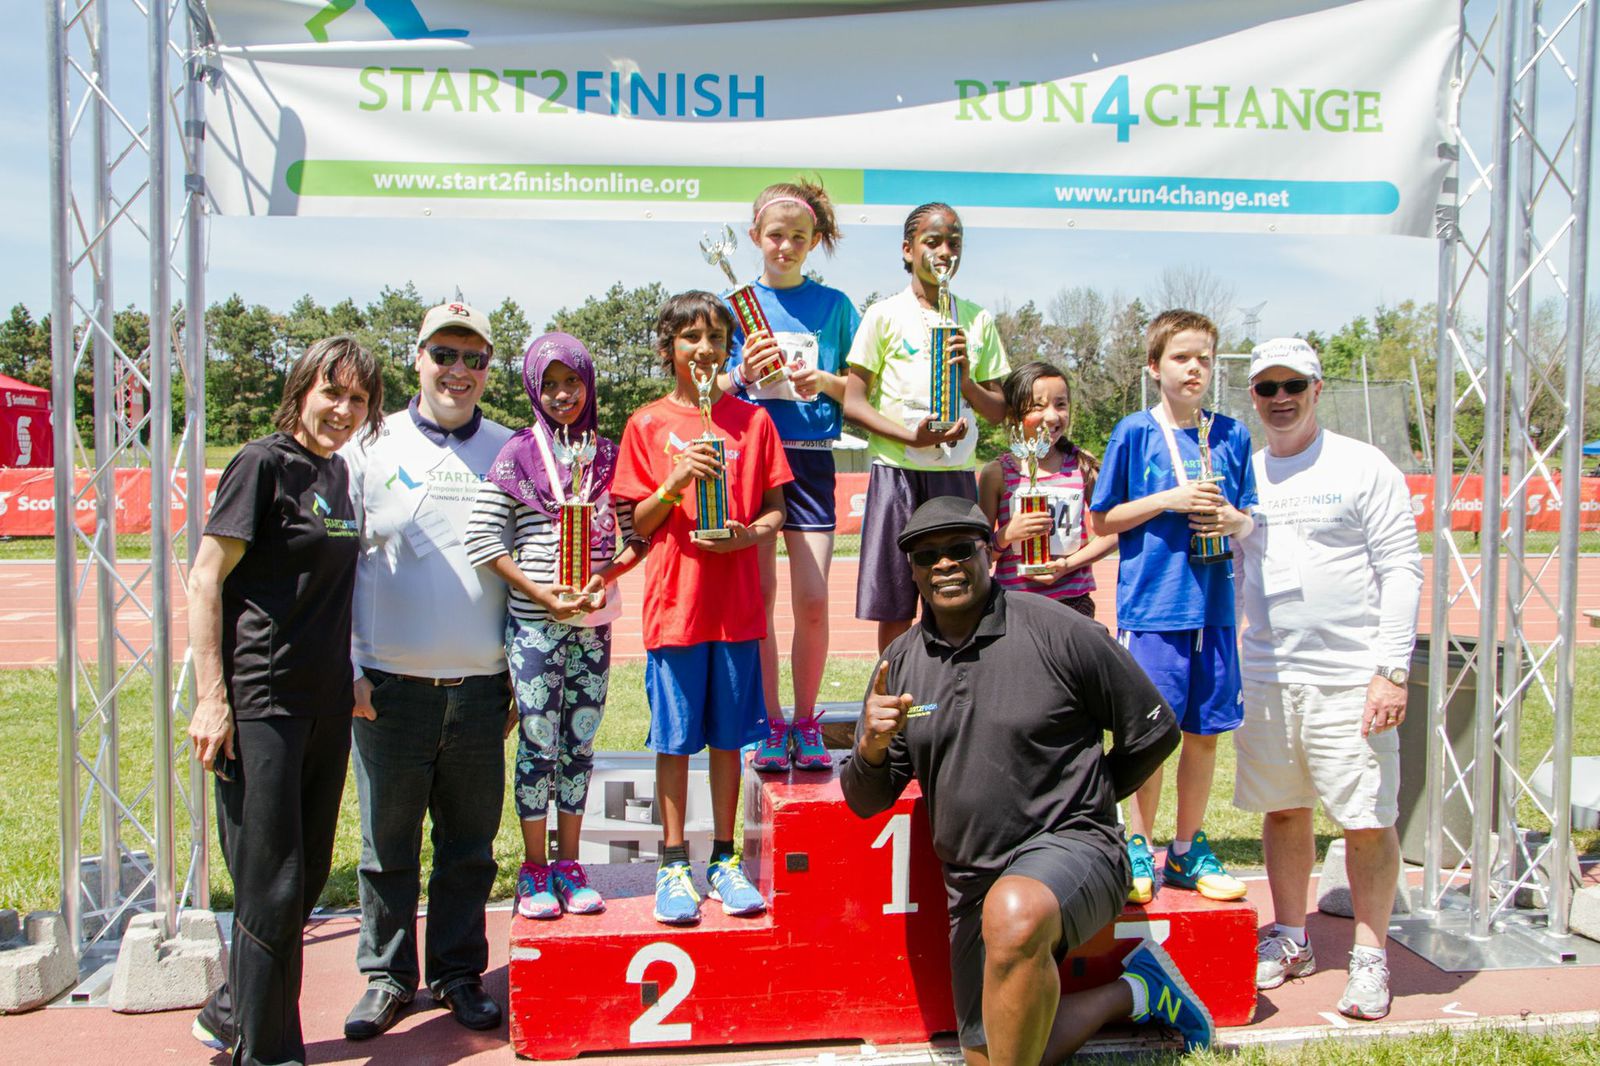 Coached by a children's author Fati (on the 1st place podium) wrote a book and won the 5k race